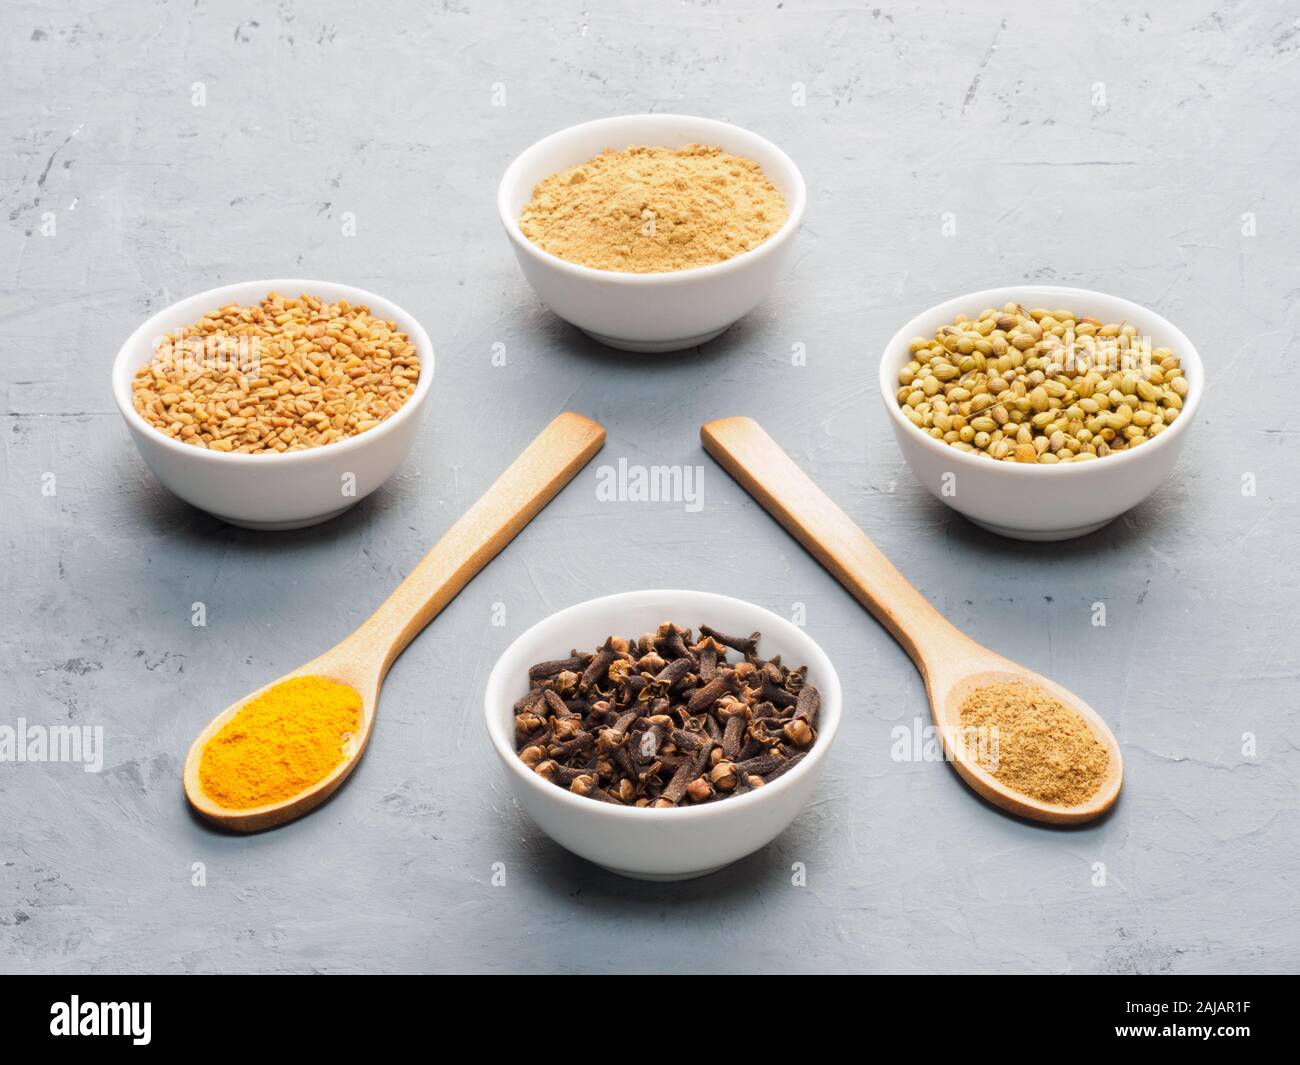 Spice dry ginger, black pepper, masala, turmeric, cloves, coriander in white bowls and spoons on gray concrete background Stock Photo